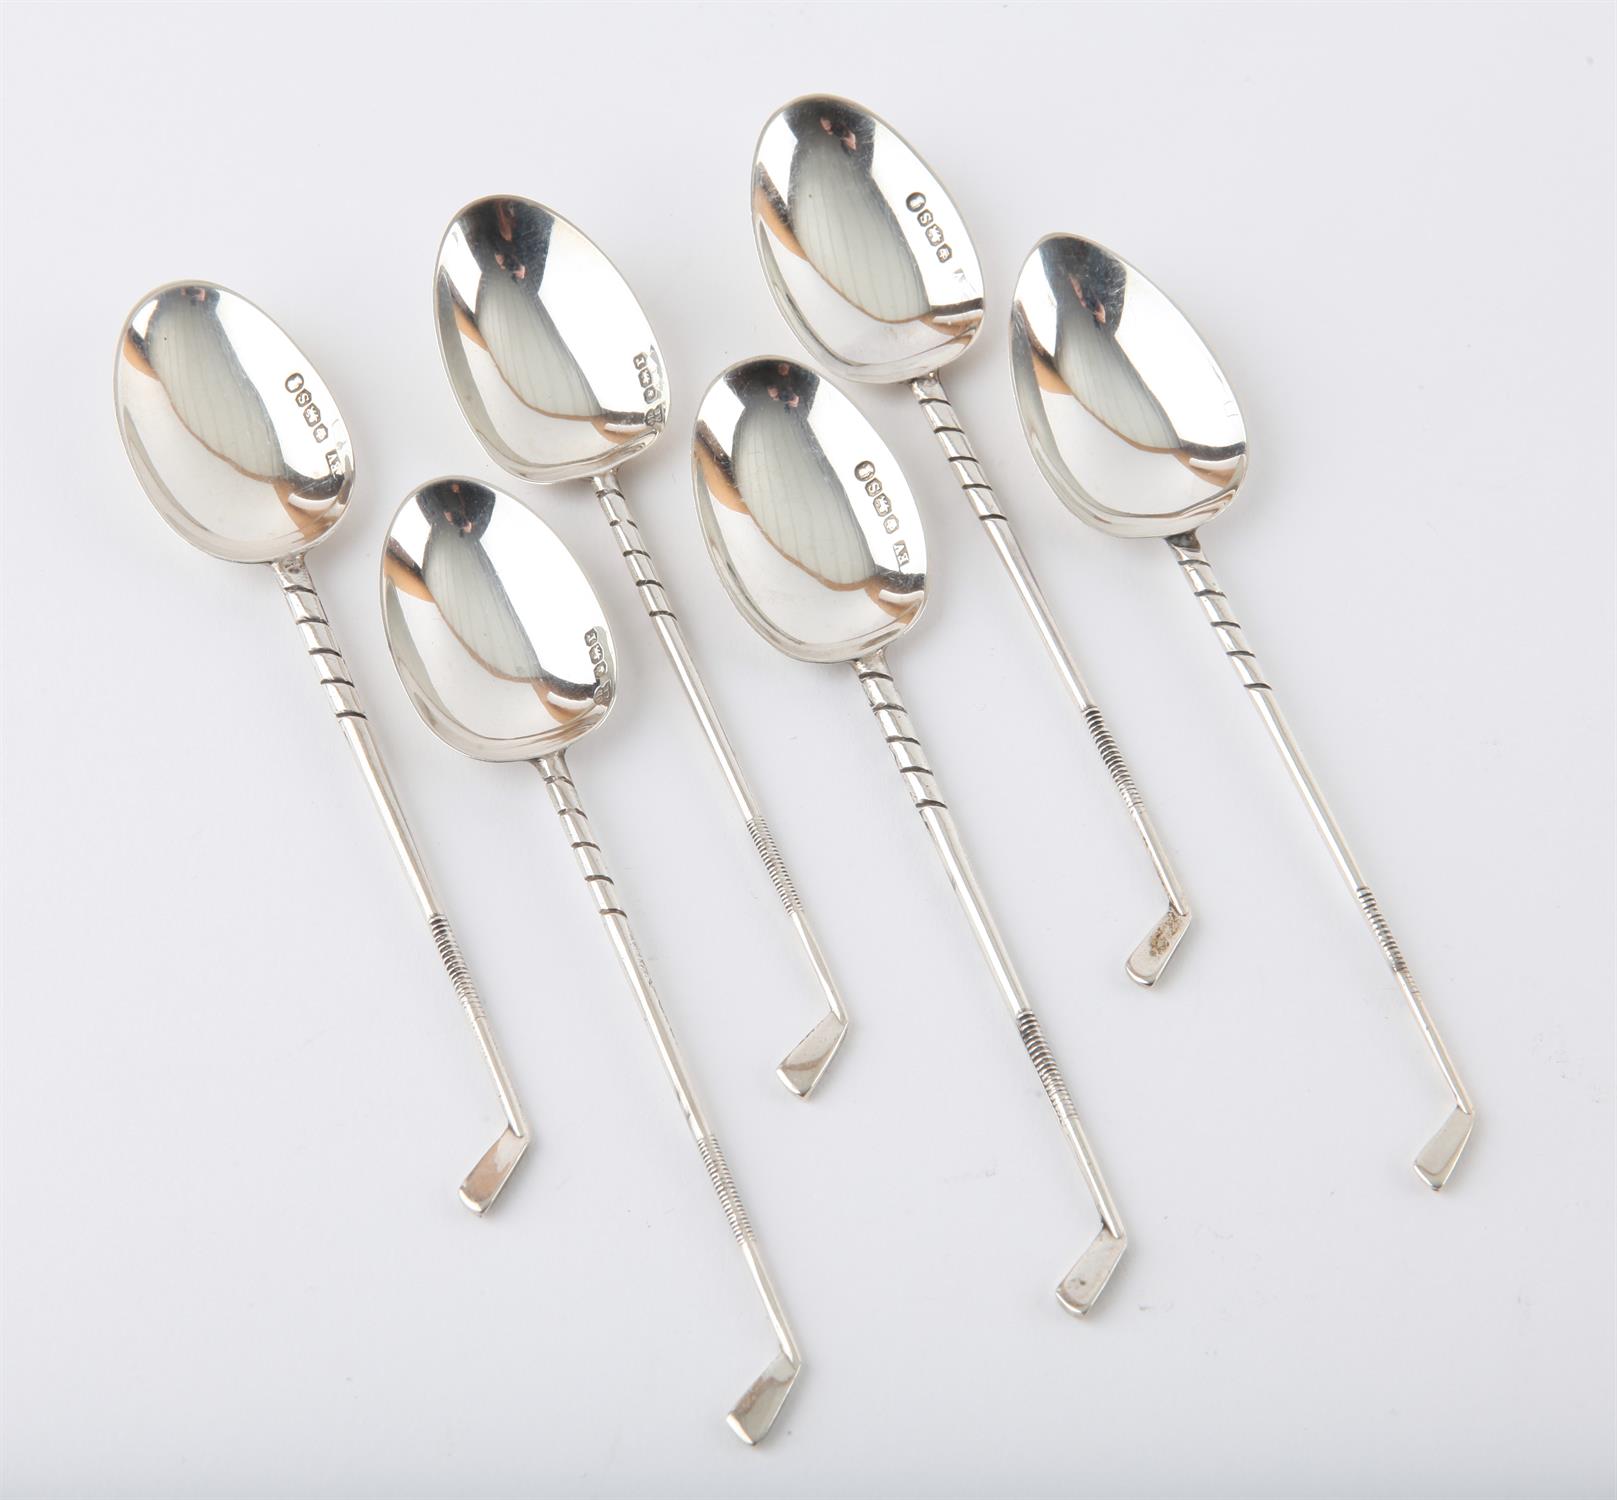 Six silver spoons with handles in the form of golf club irons